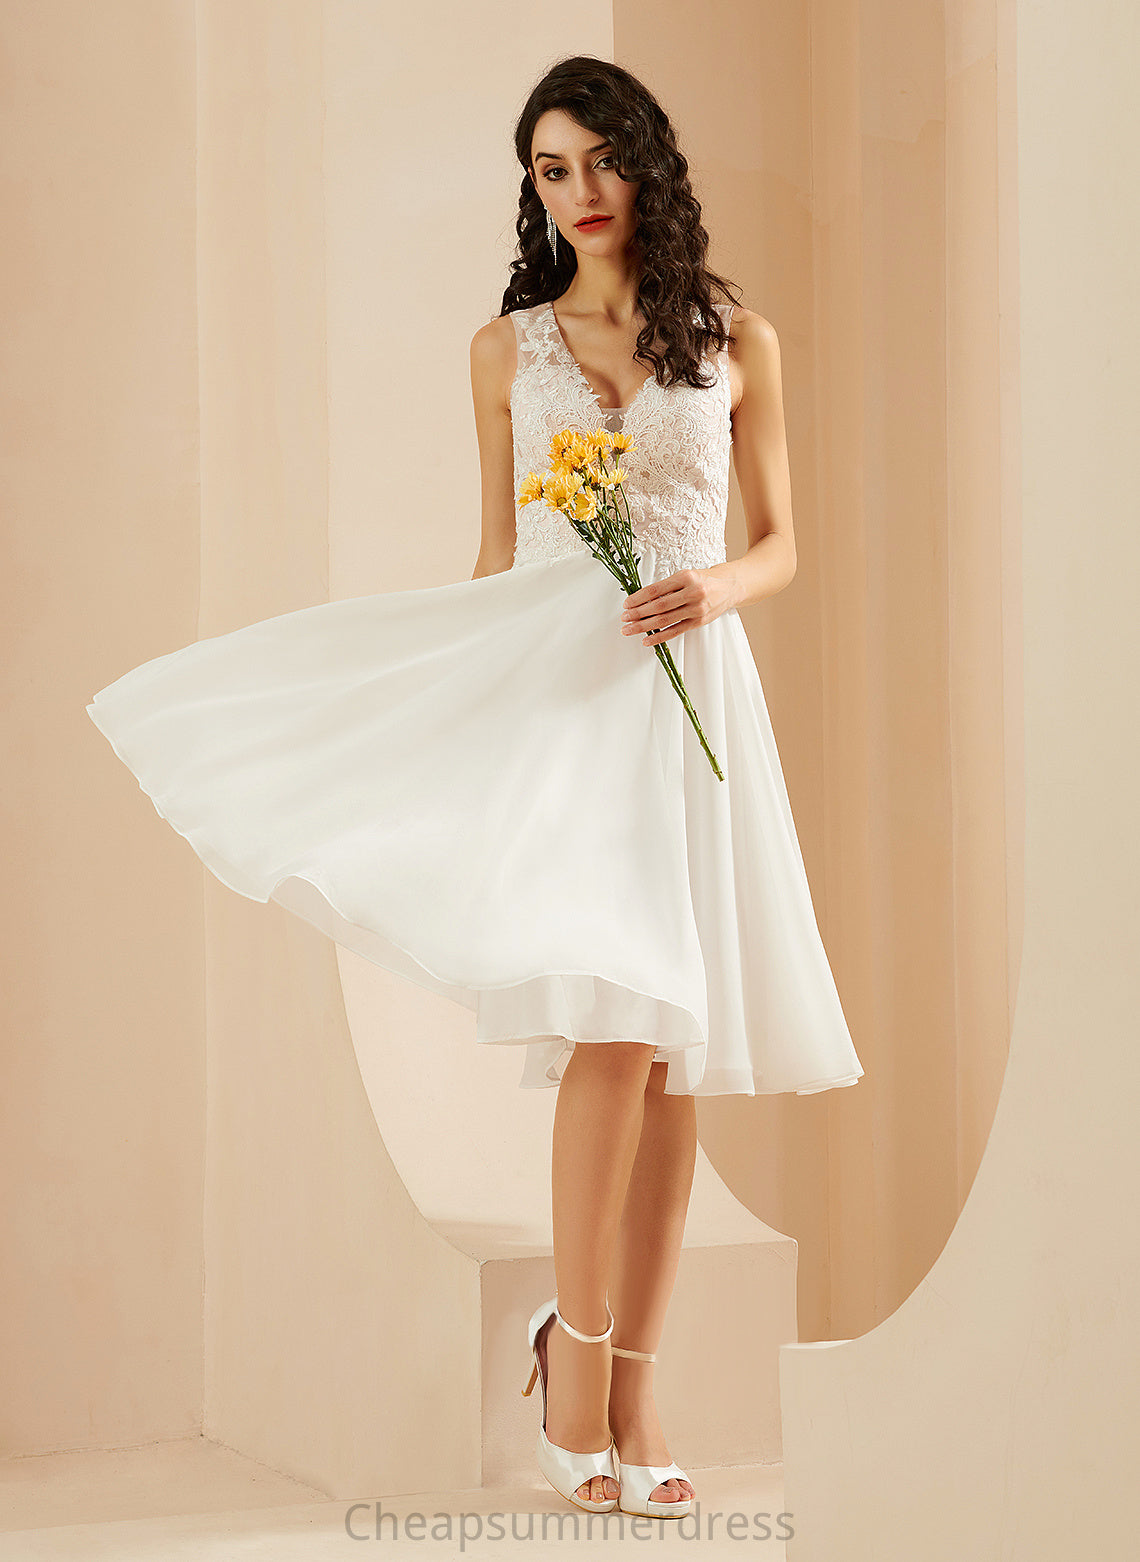 Wedding Dresses Sequins Shelby Knee-Length Wedding Chiffon A-Line V-neck With Dress Lace